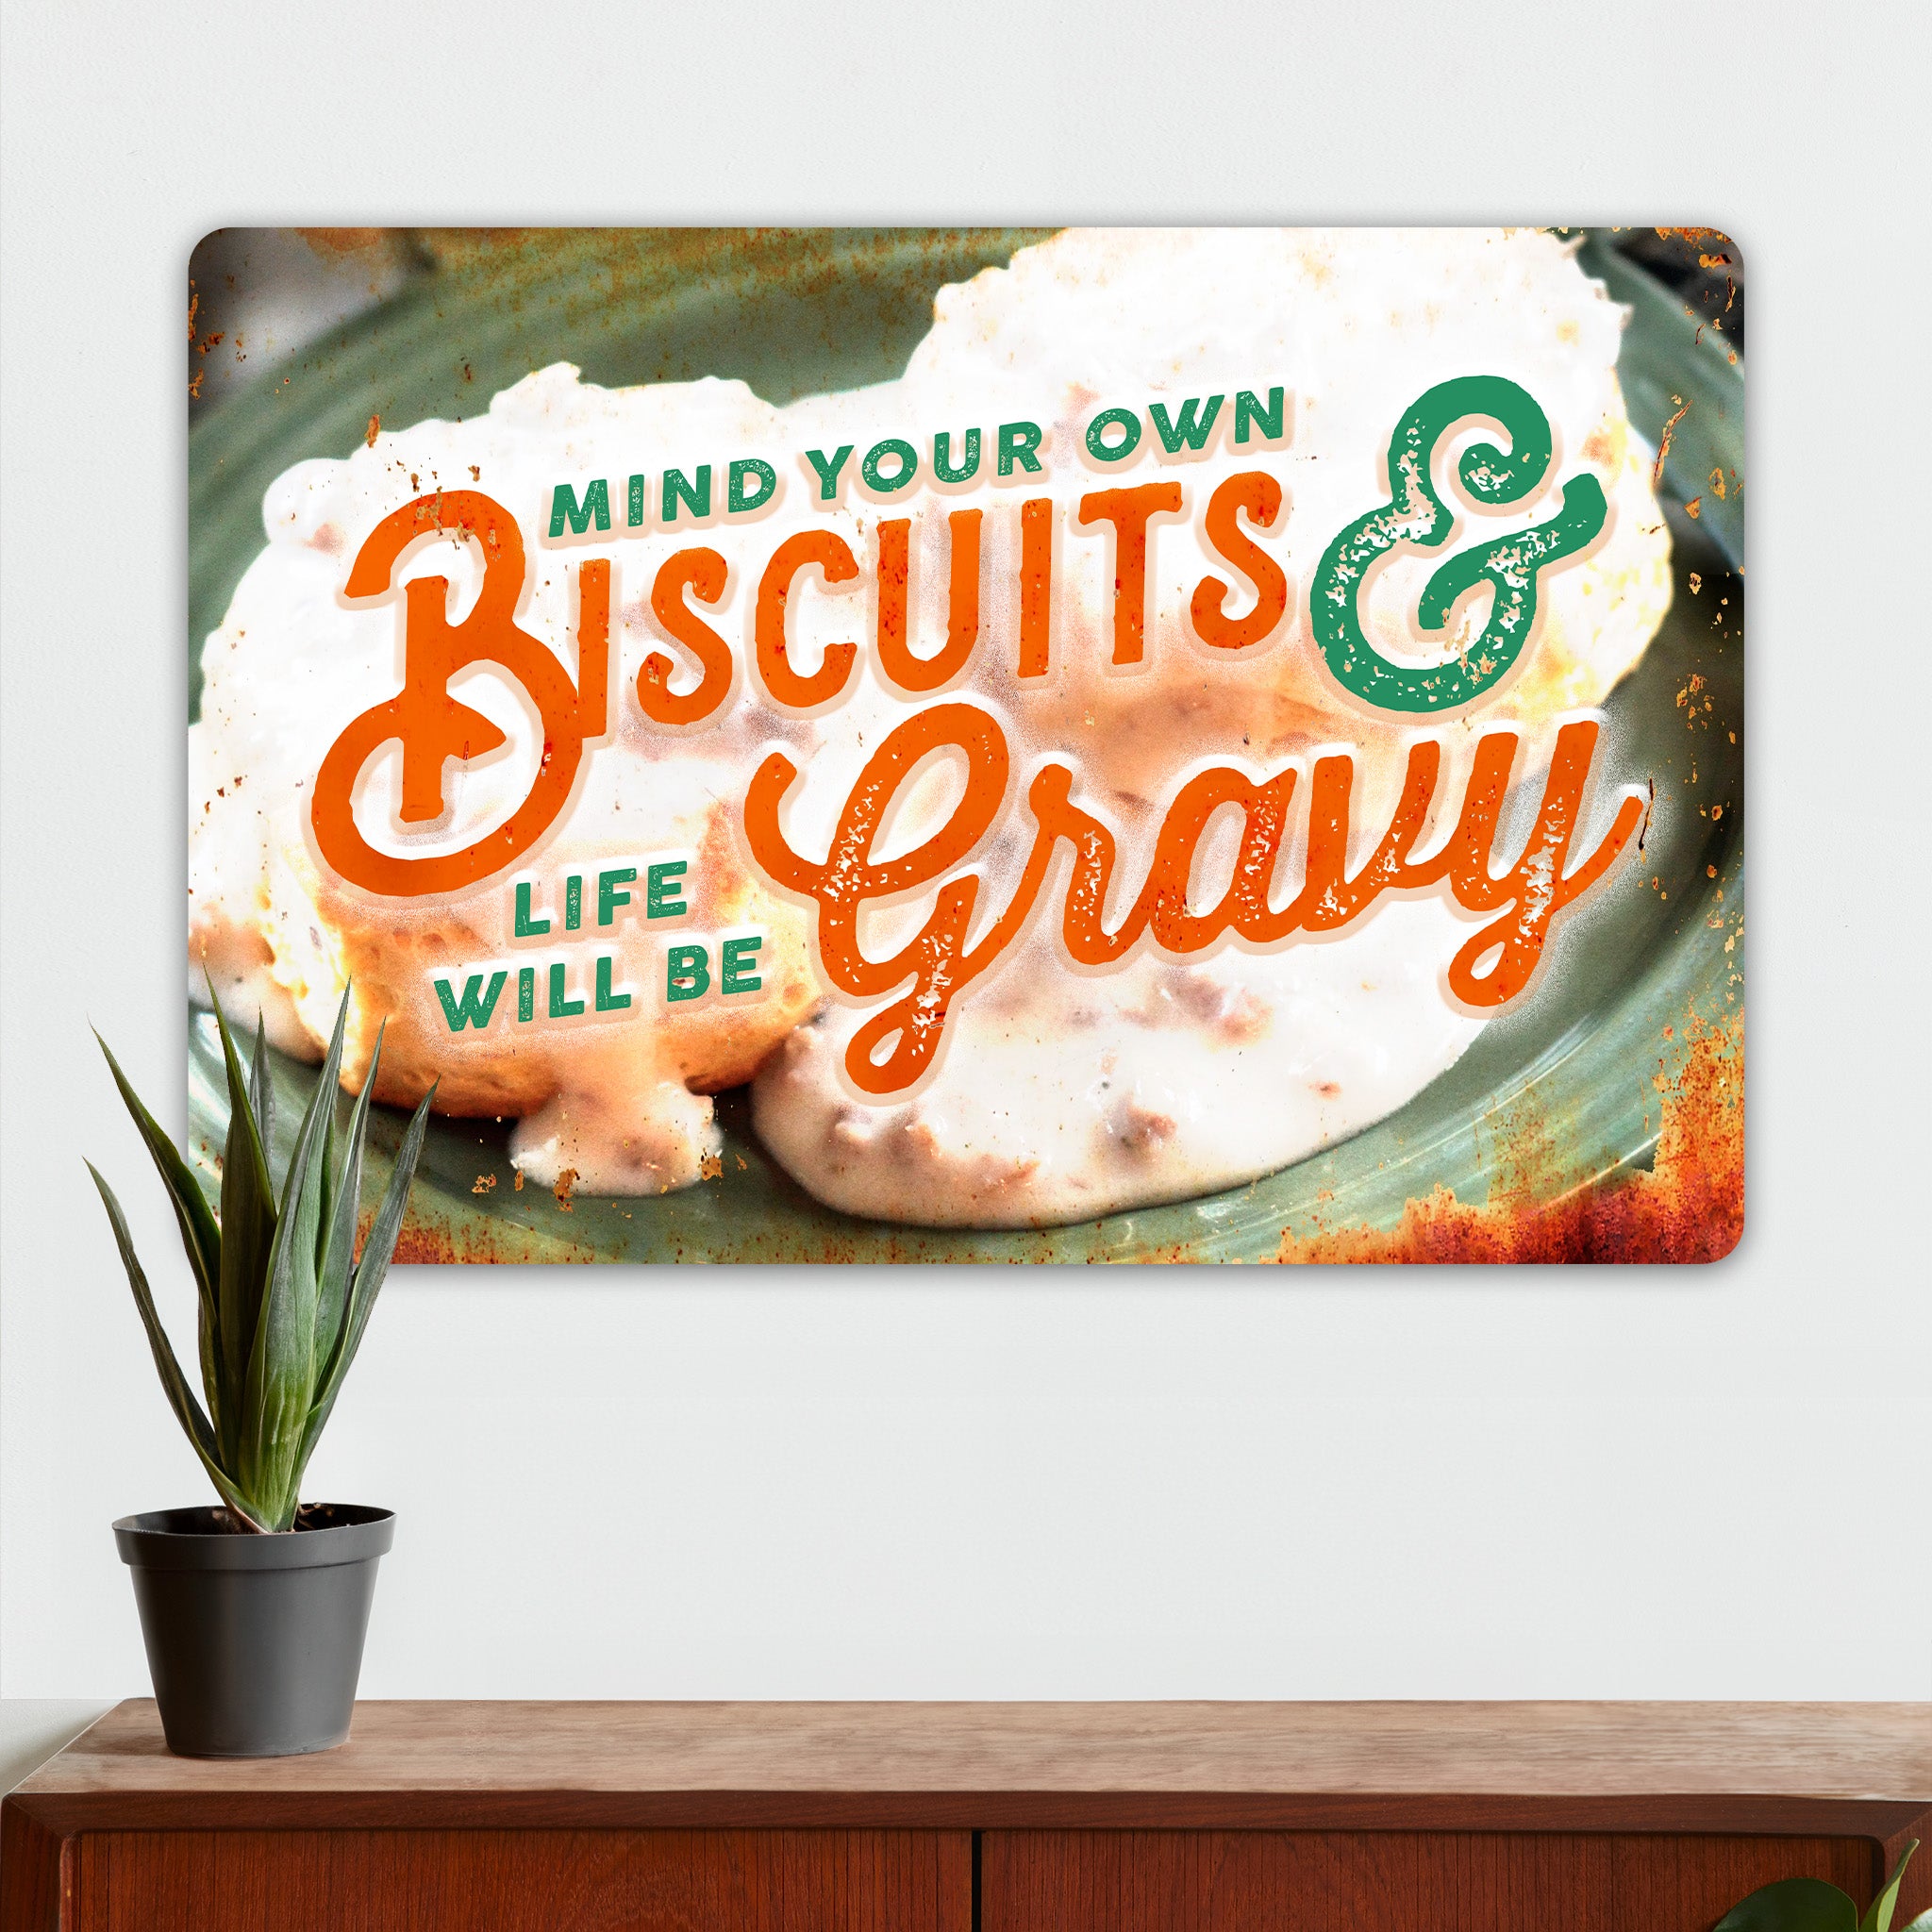 Farmhouse Kitchen Wall Decor - Mind Your Own Biscuits & Life Will Be Gravy - Metal Sign